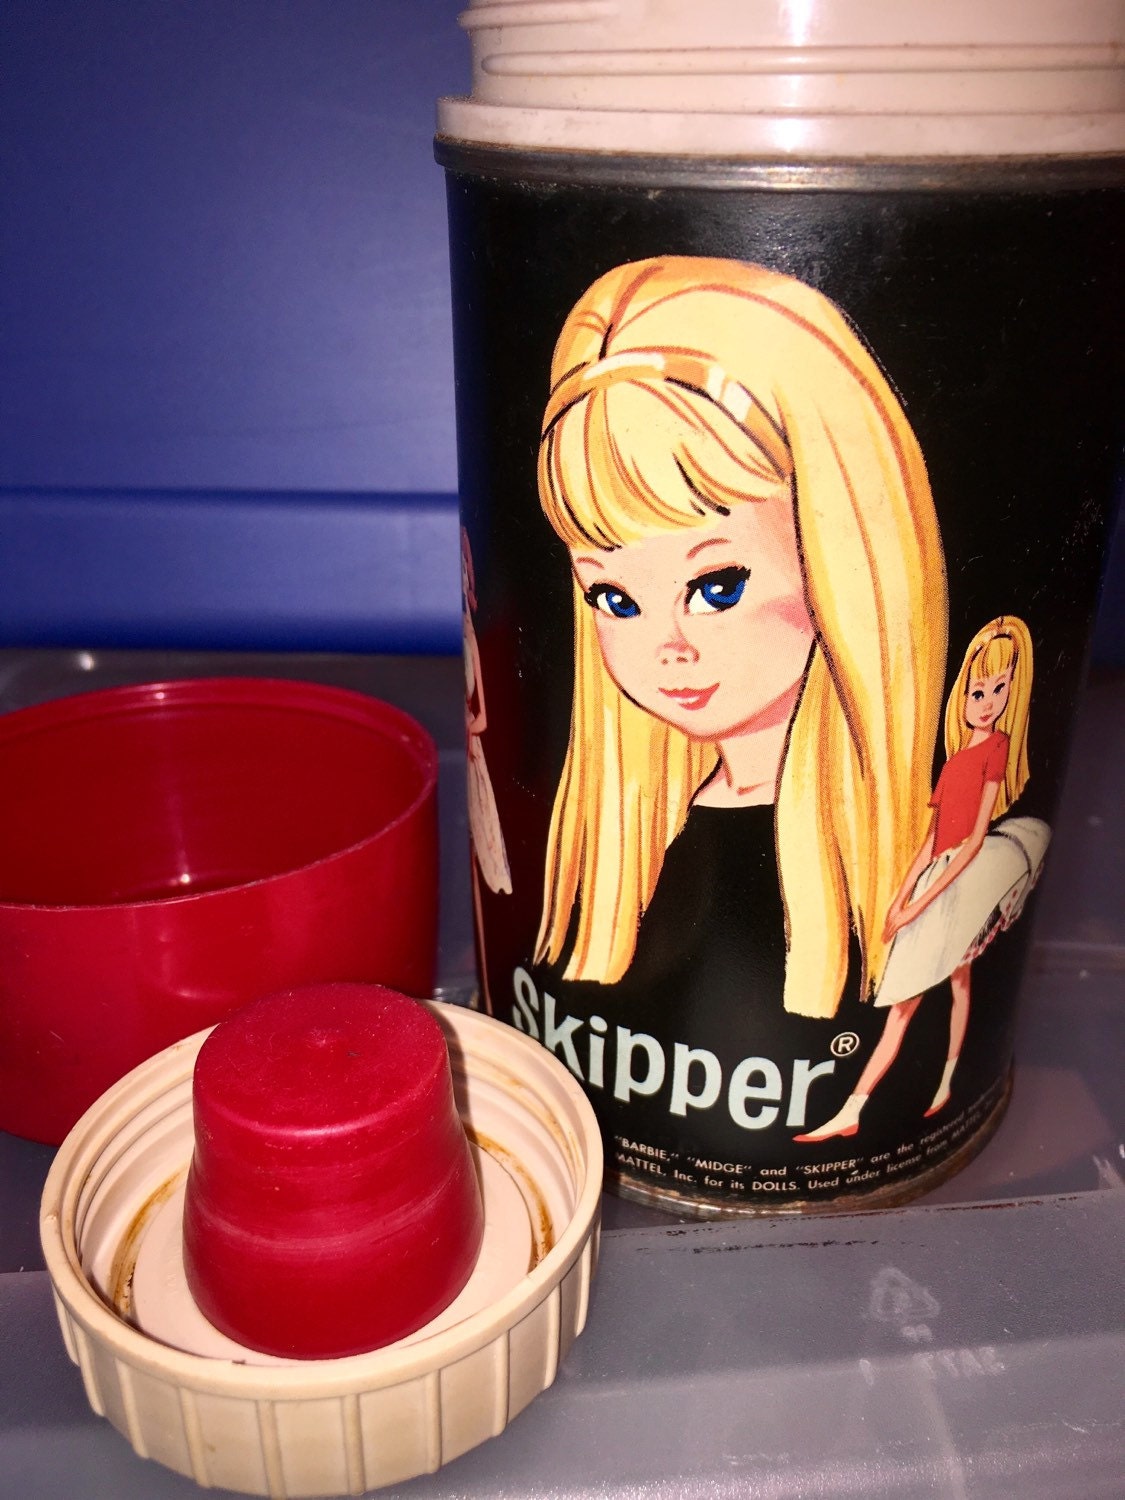 1965 Barbie Midge Skipper Lunchbox Thermos Only Mattel Doll Girl's Toy  Vintage